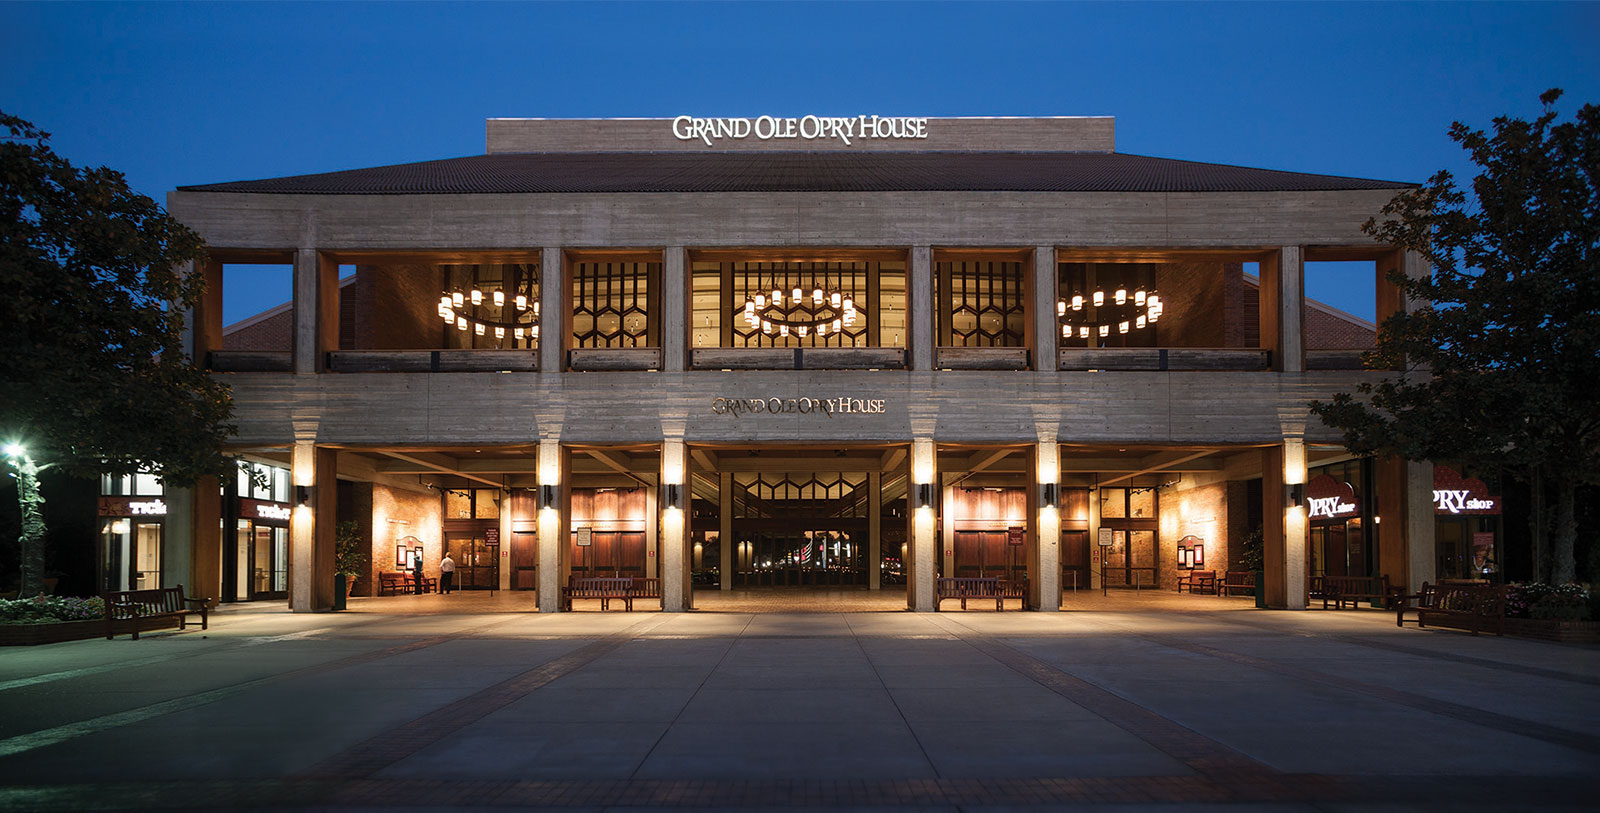 Experience a concert at The Grand Ole Opry.